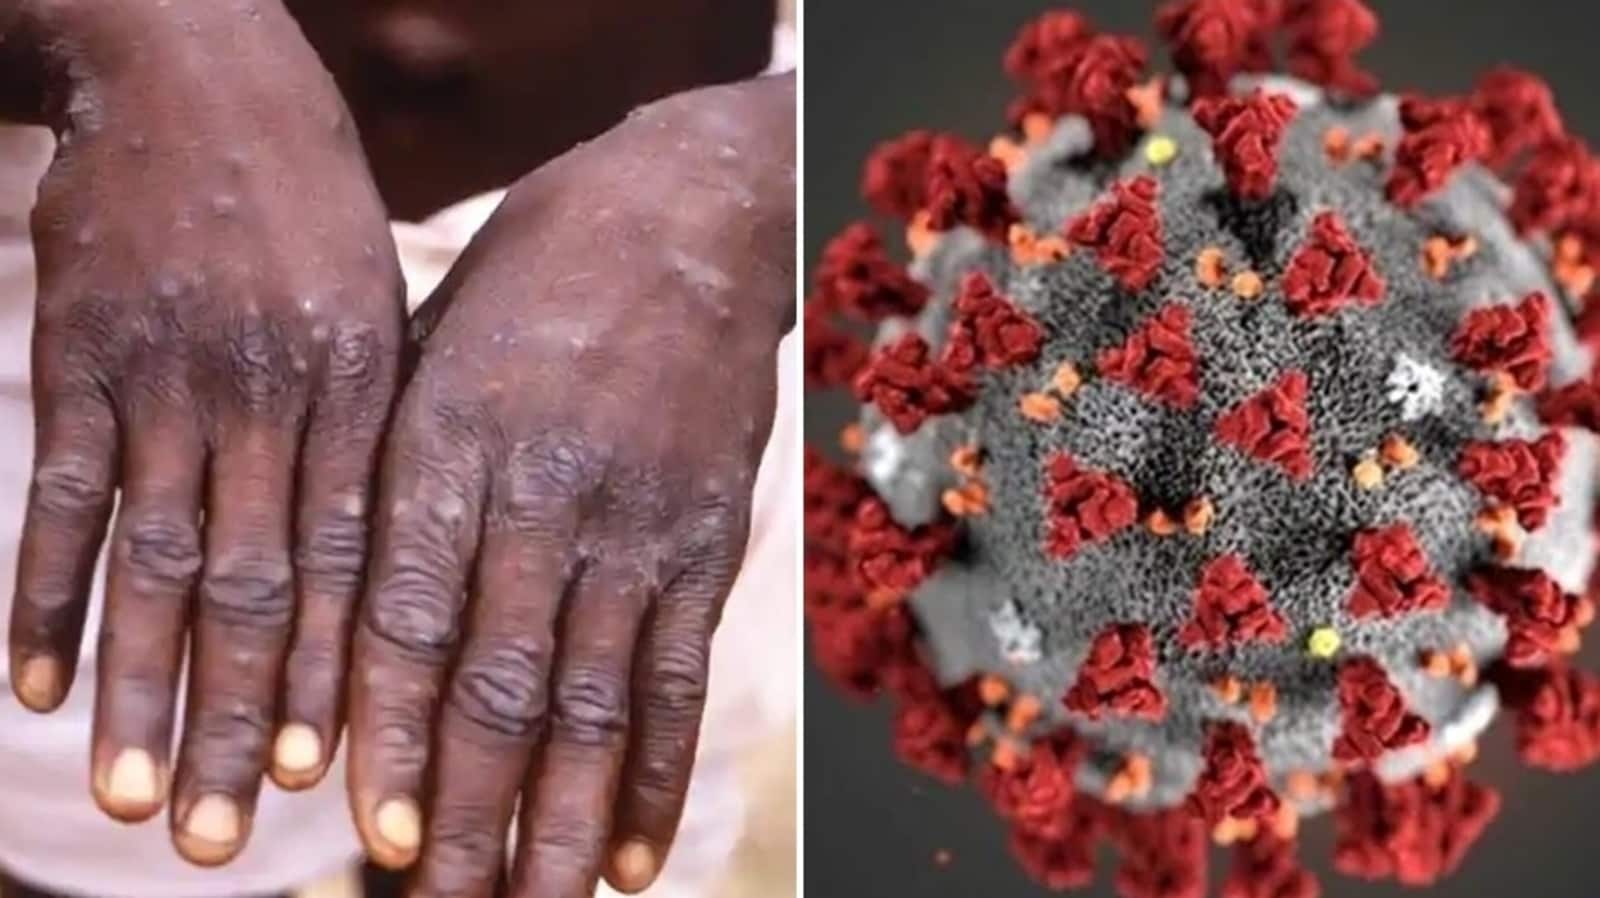 Can monkeypox and Covid-19 co-exist? Here’s what an expert has to say | Health